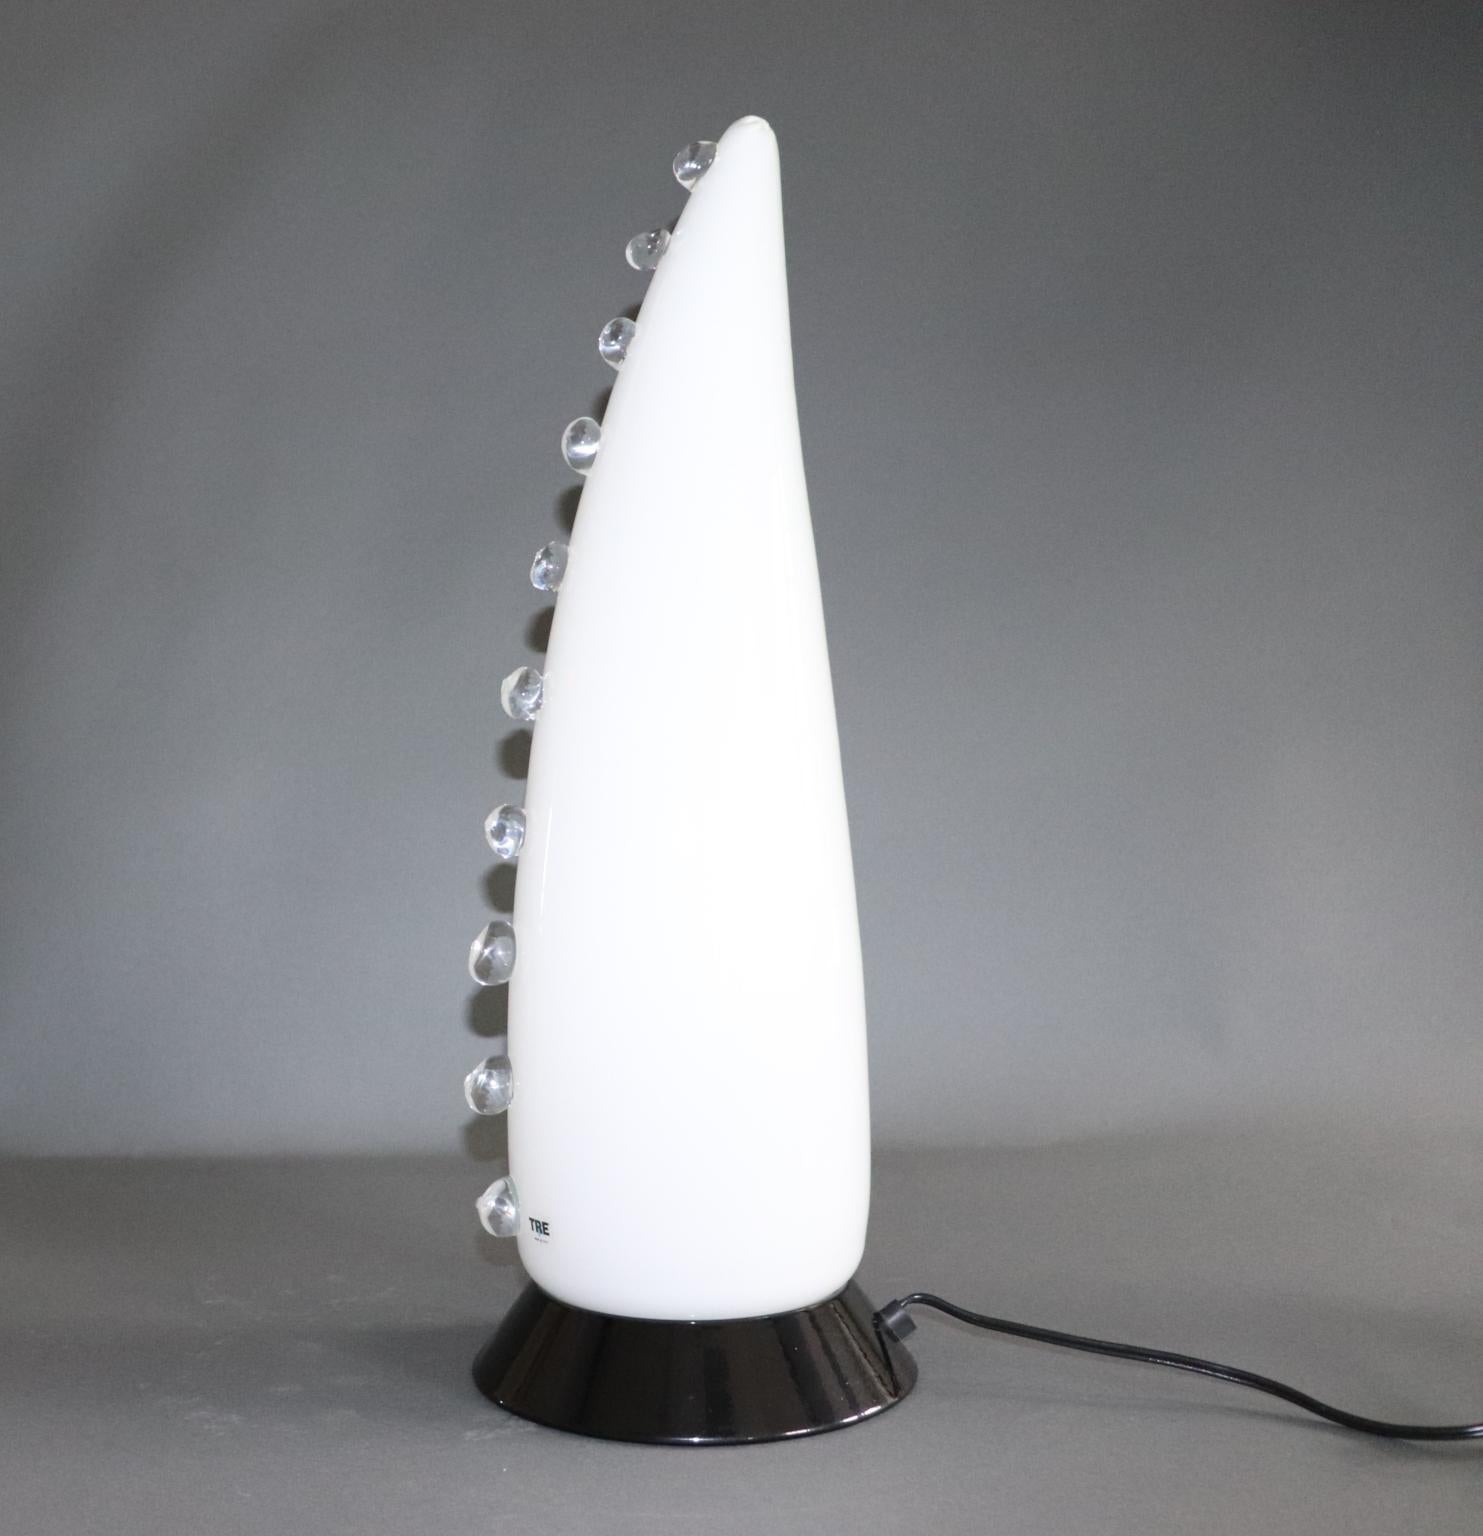 Italian table lamp in white Murano hand blown glass with crystal details.
The 